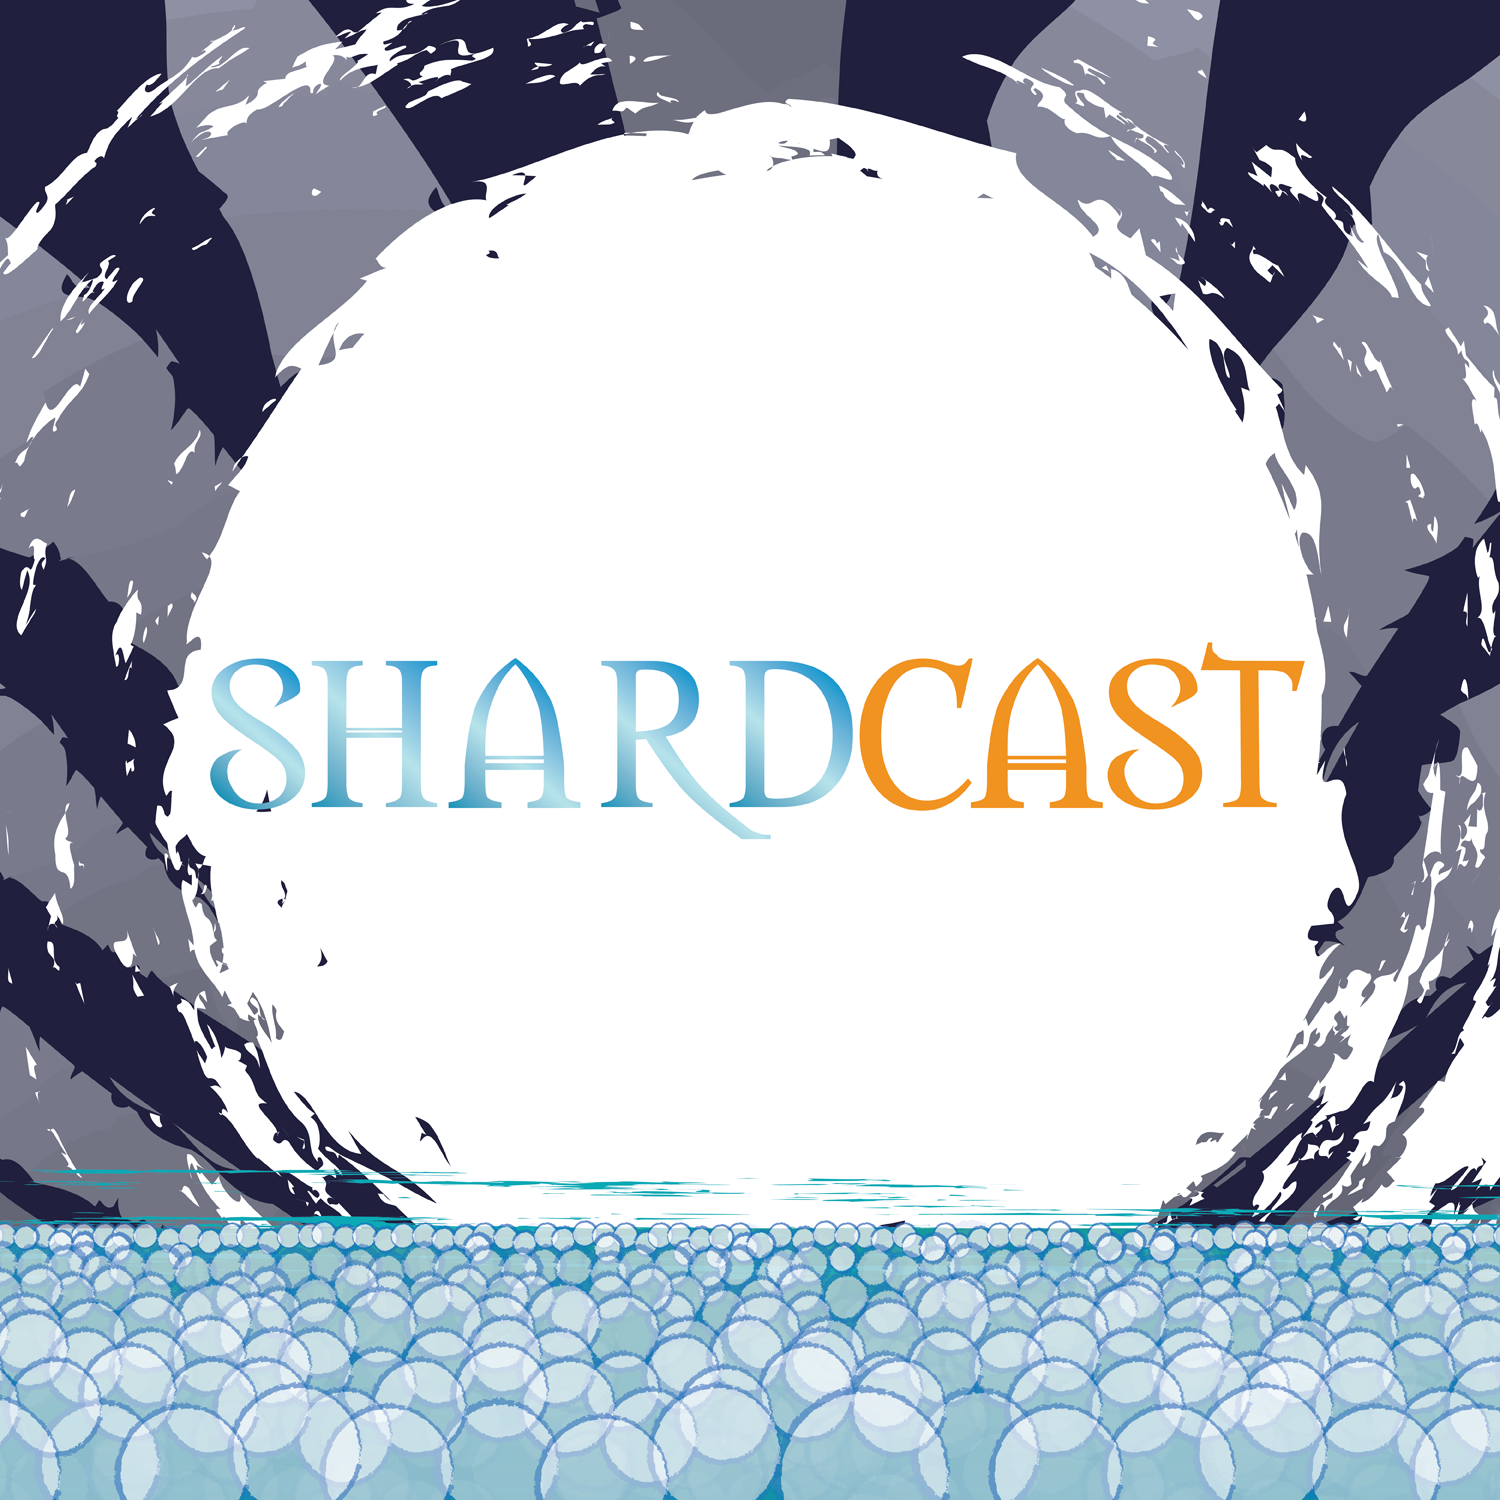 More information about "Shardcast: Dawnshard Novella Title and Predictions"